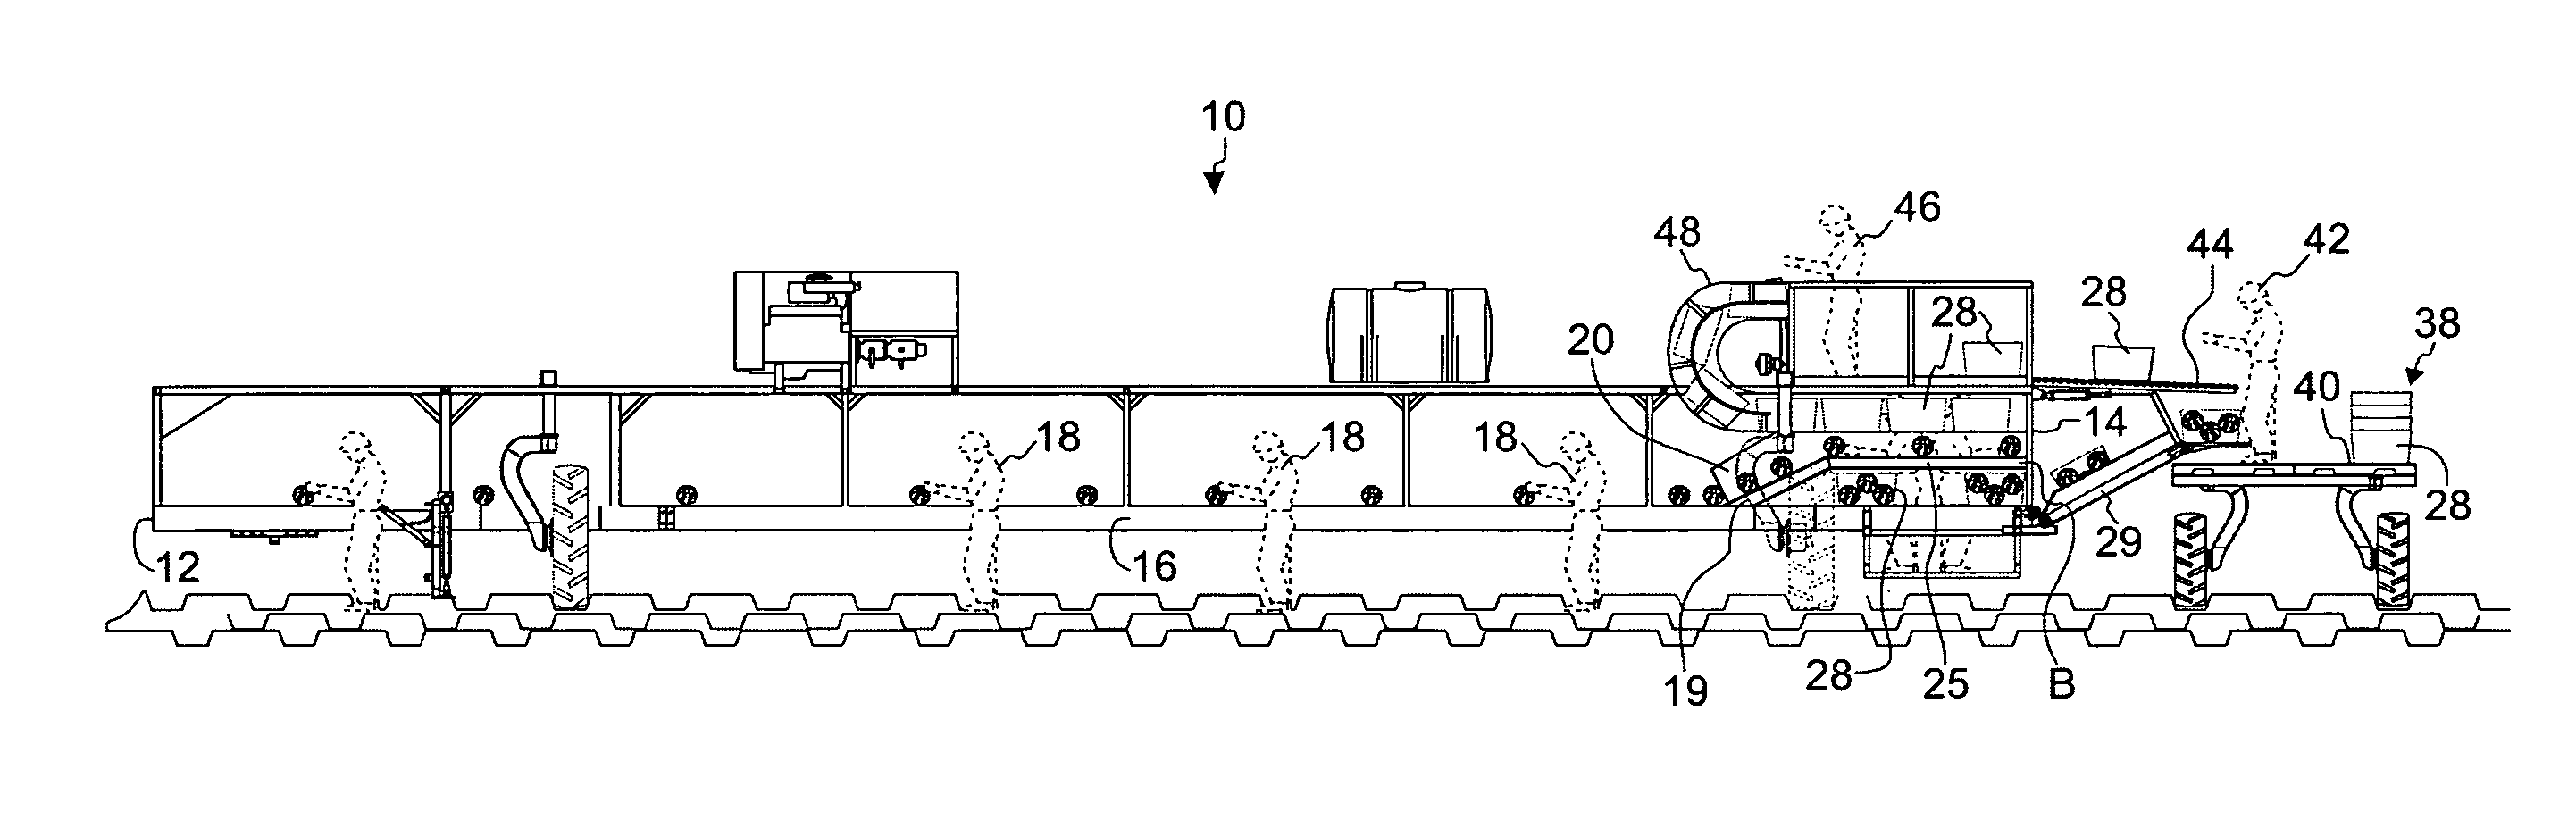 Combination bulk and tote loading harvesting apparatus and method